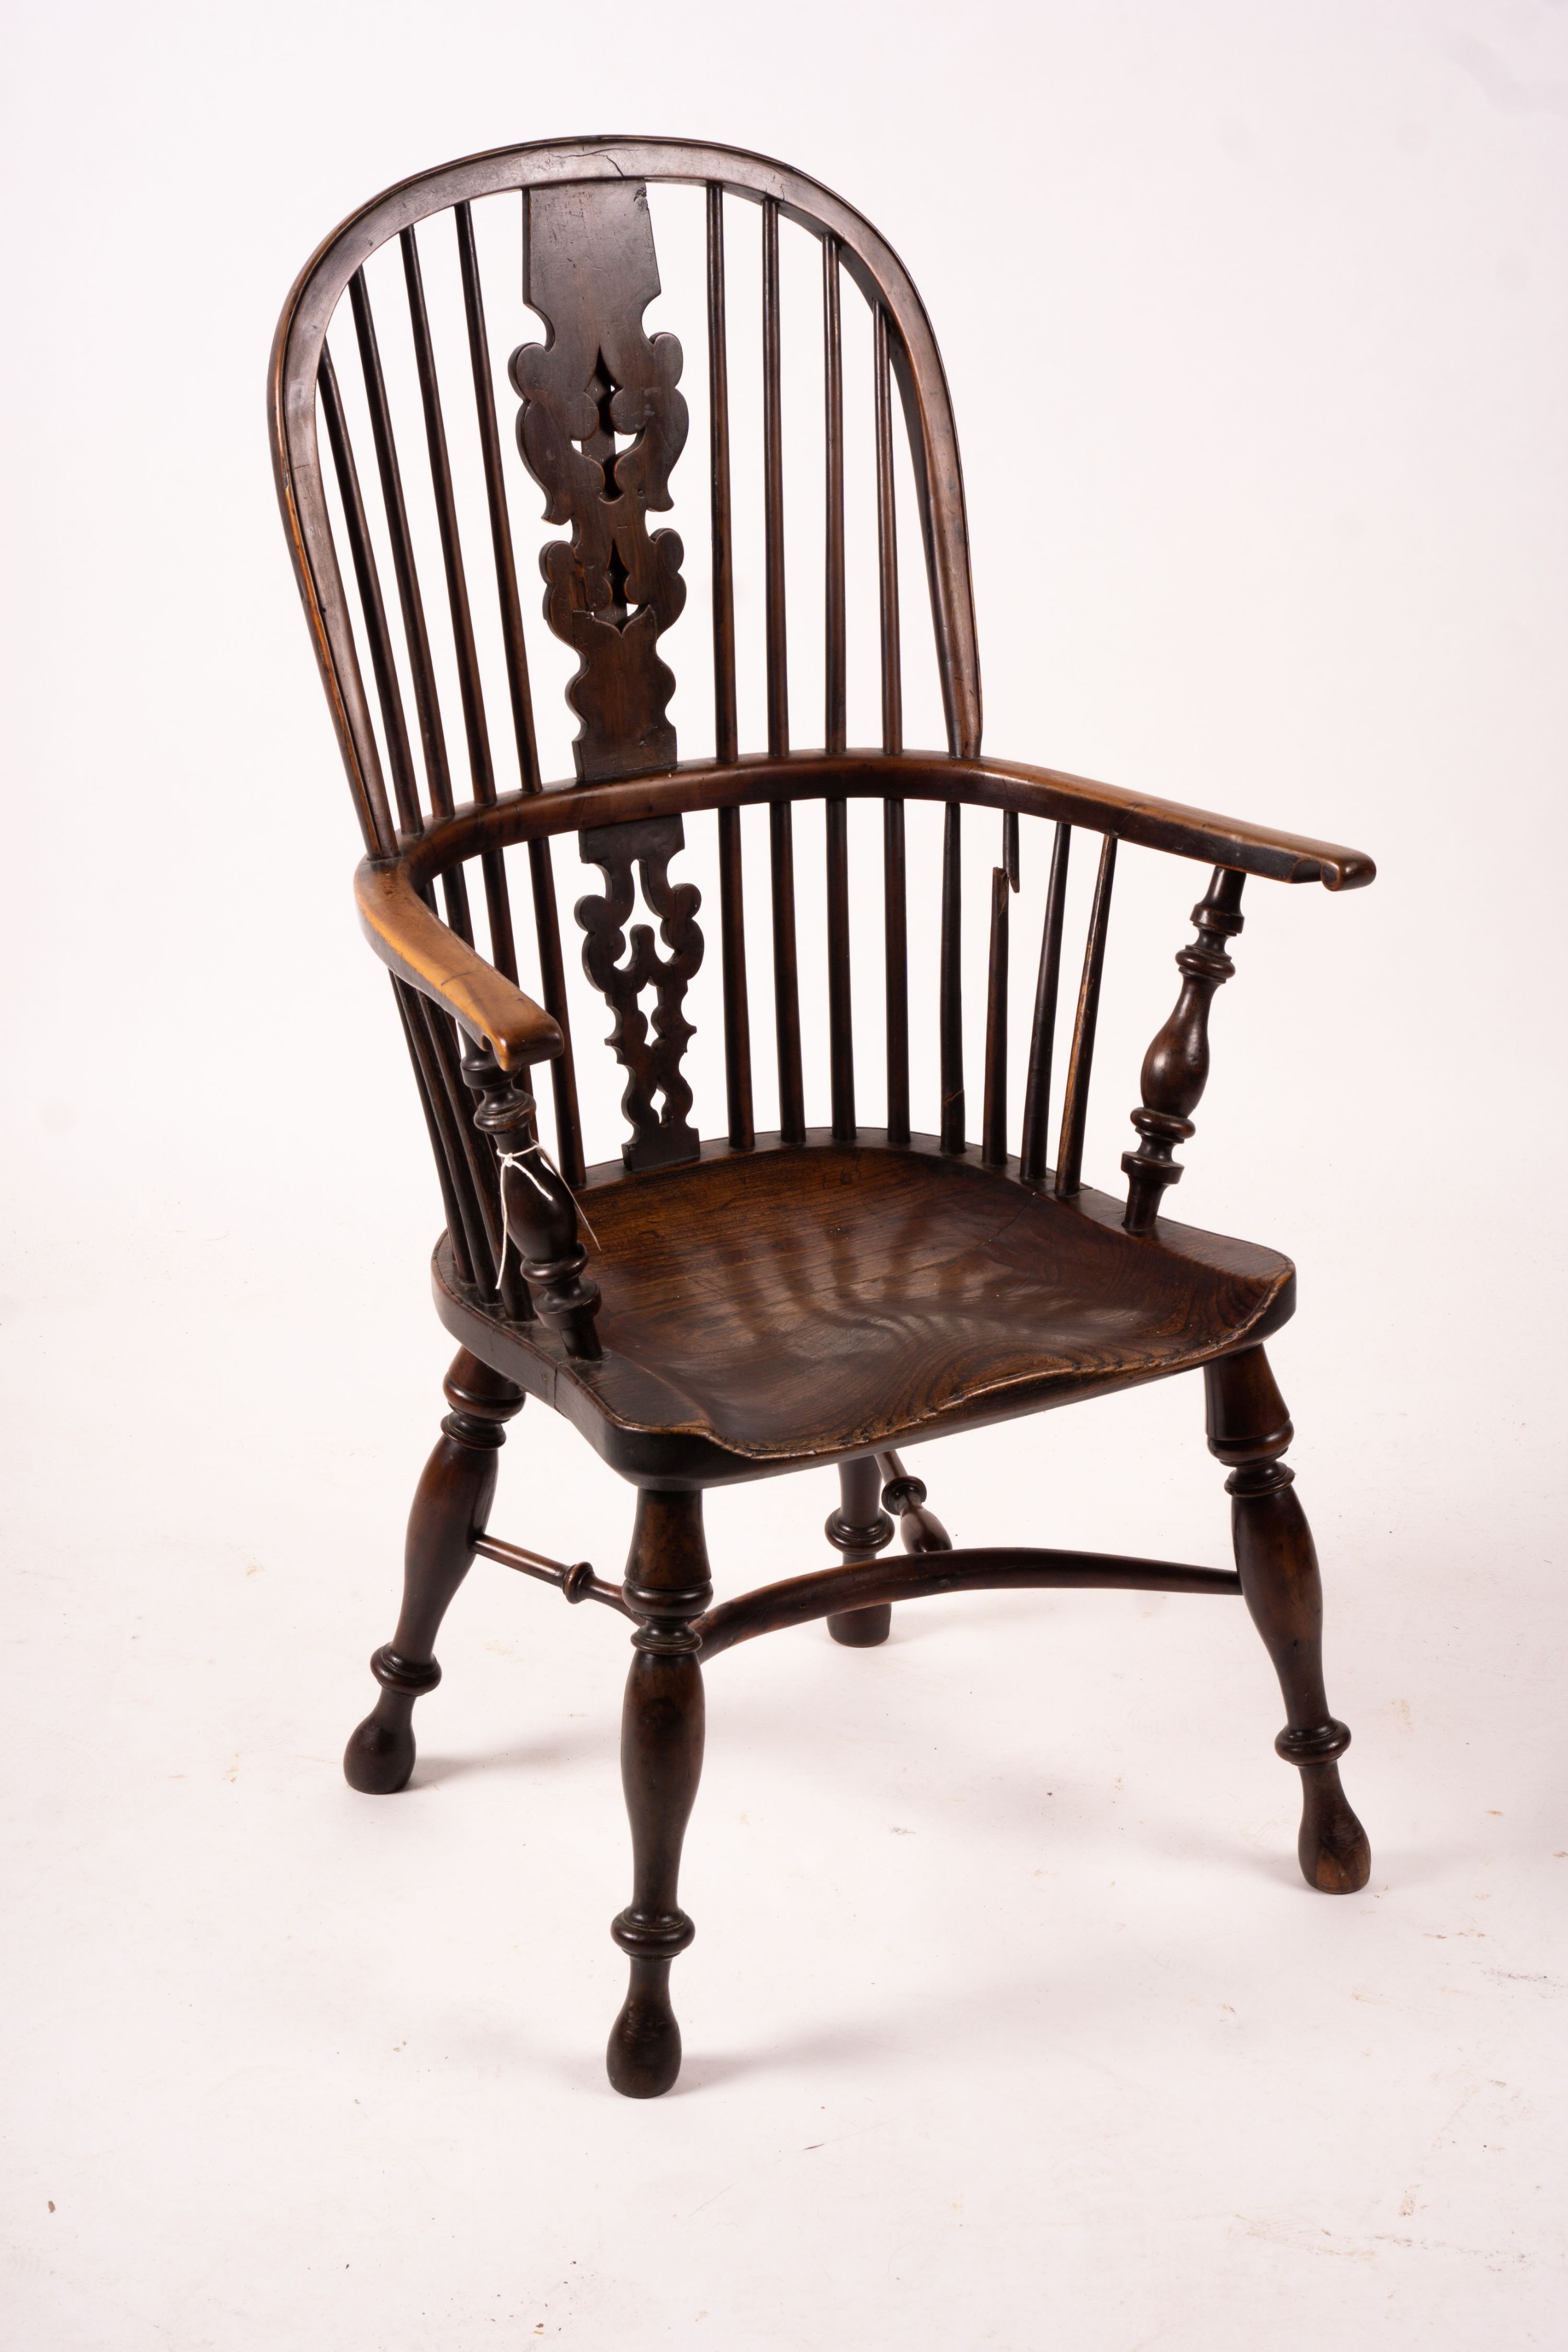 A mid 19th century yew and elm Yorkshire area Windsor armchair with saddle-seat and crinoline stretcher, width 63cm, depth 47cm, height 110cm